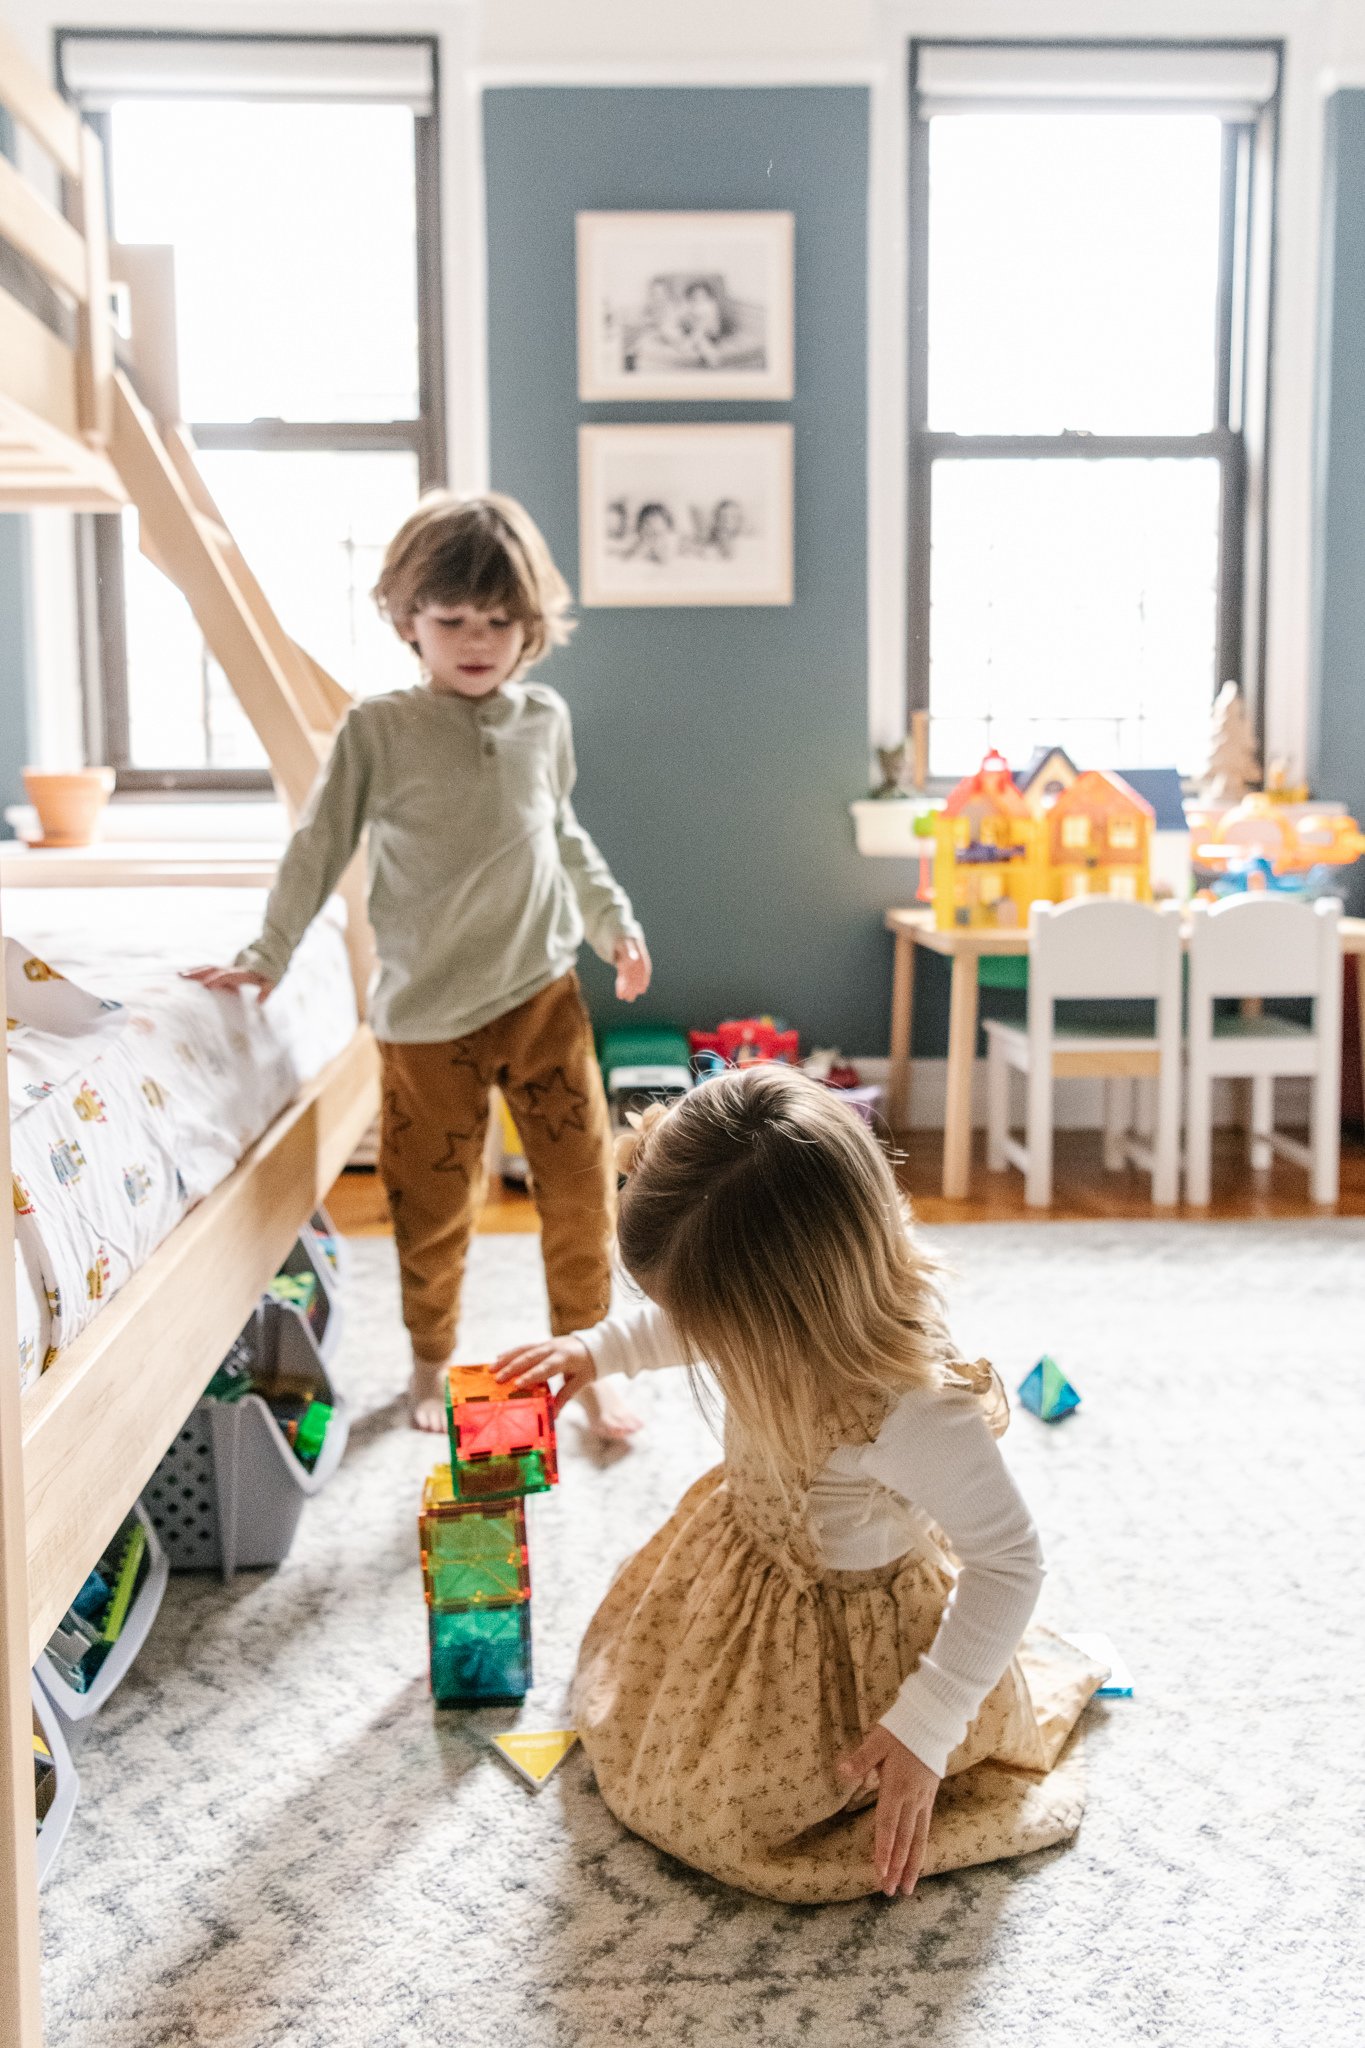   Casual at-home sibling portrait of kids playing in a bedroom. Casual family photoshoot inspiration at home lifestyle photos ideas casual brother sister portraits #UnionCountyFamilyPhotographer #MorrisCountyFamilyPhotographer #NorthernNewJerseyFamil